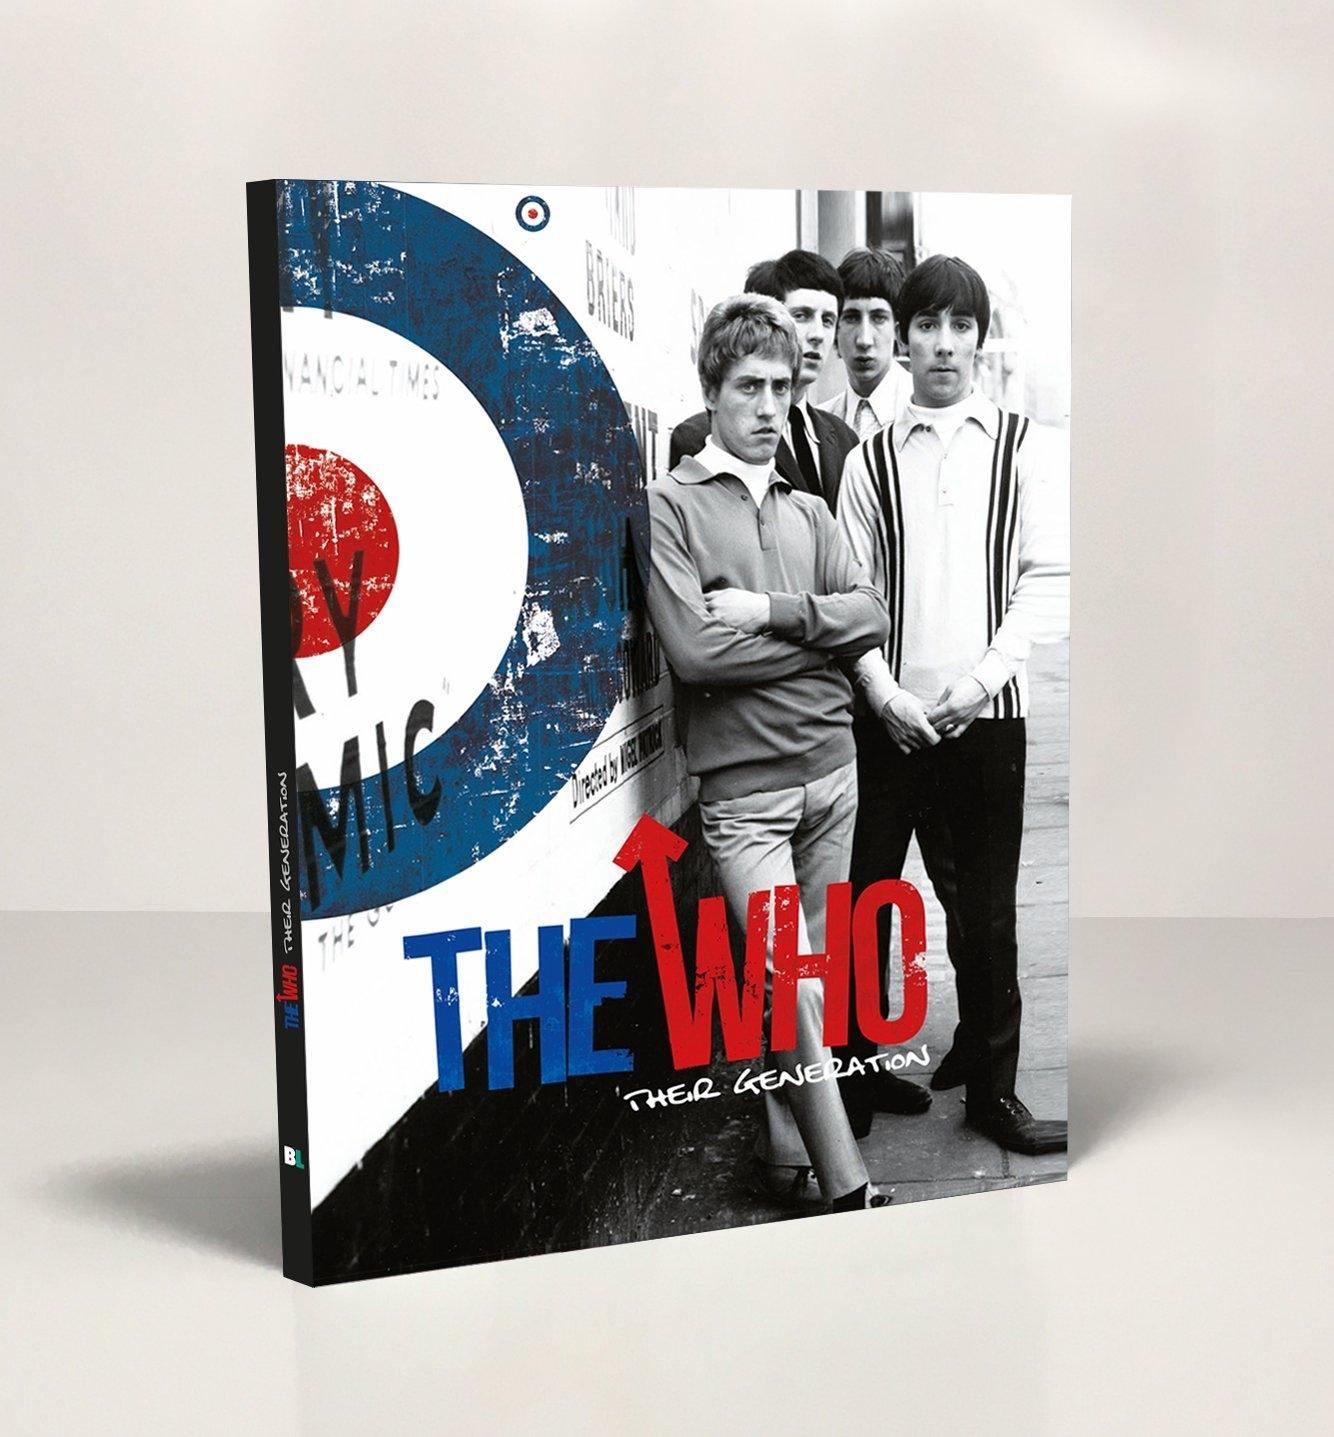 The Who "Their Generation"